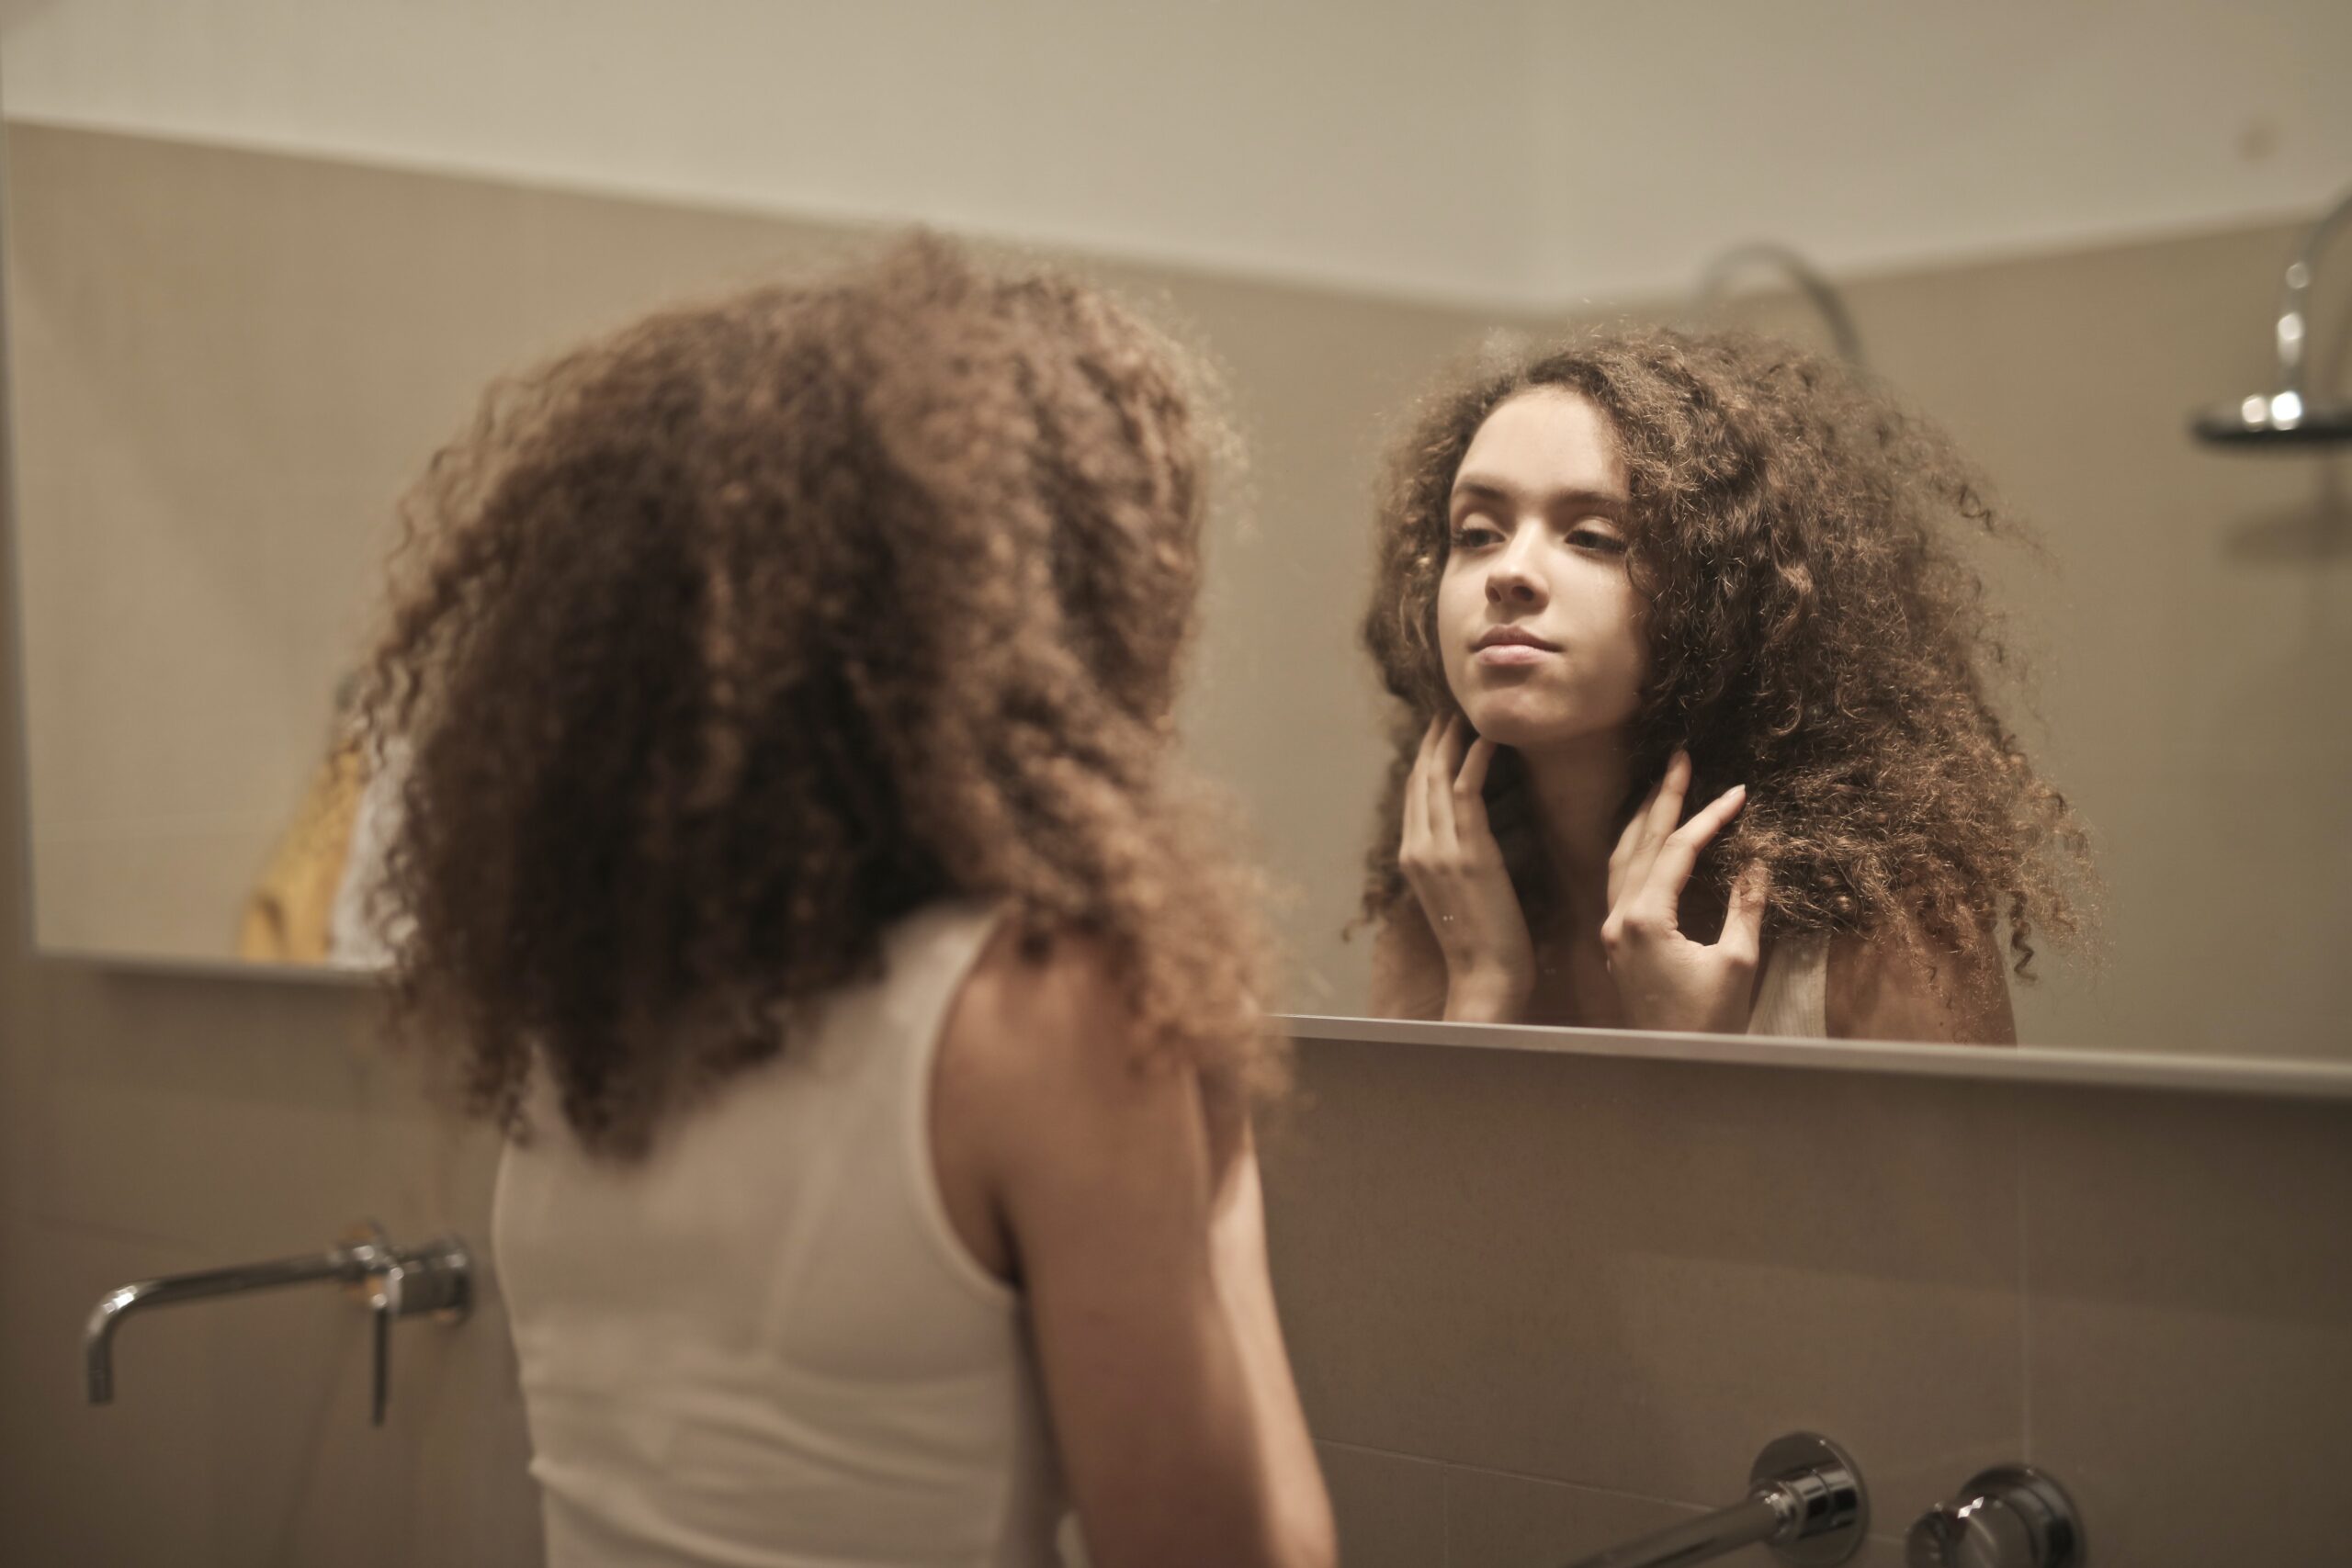 woman looking at herself in the mirror